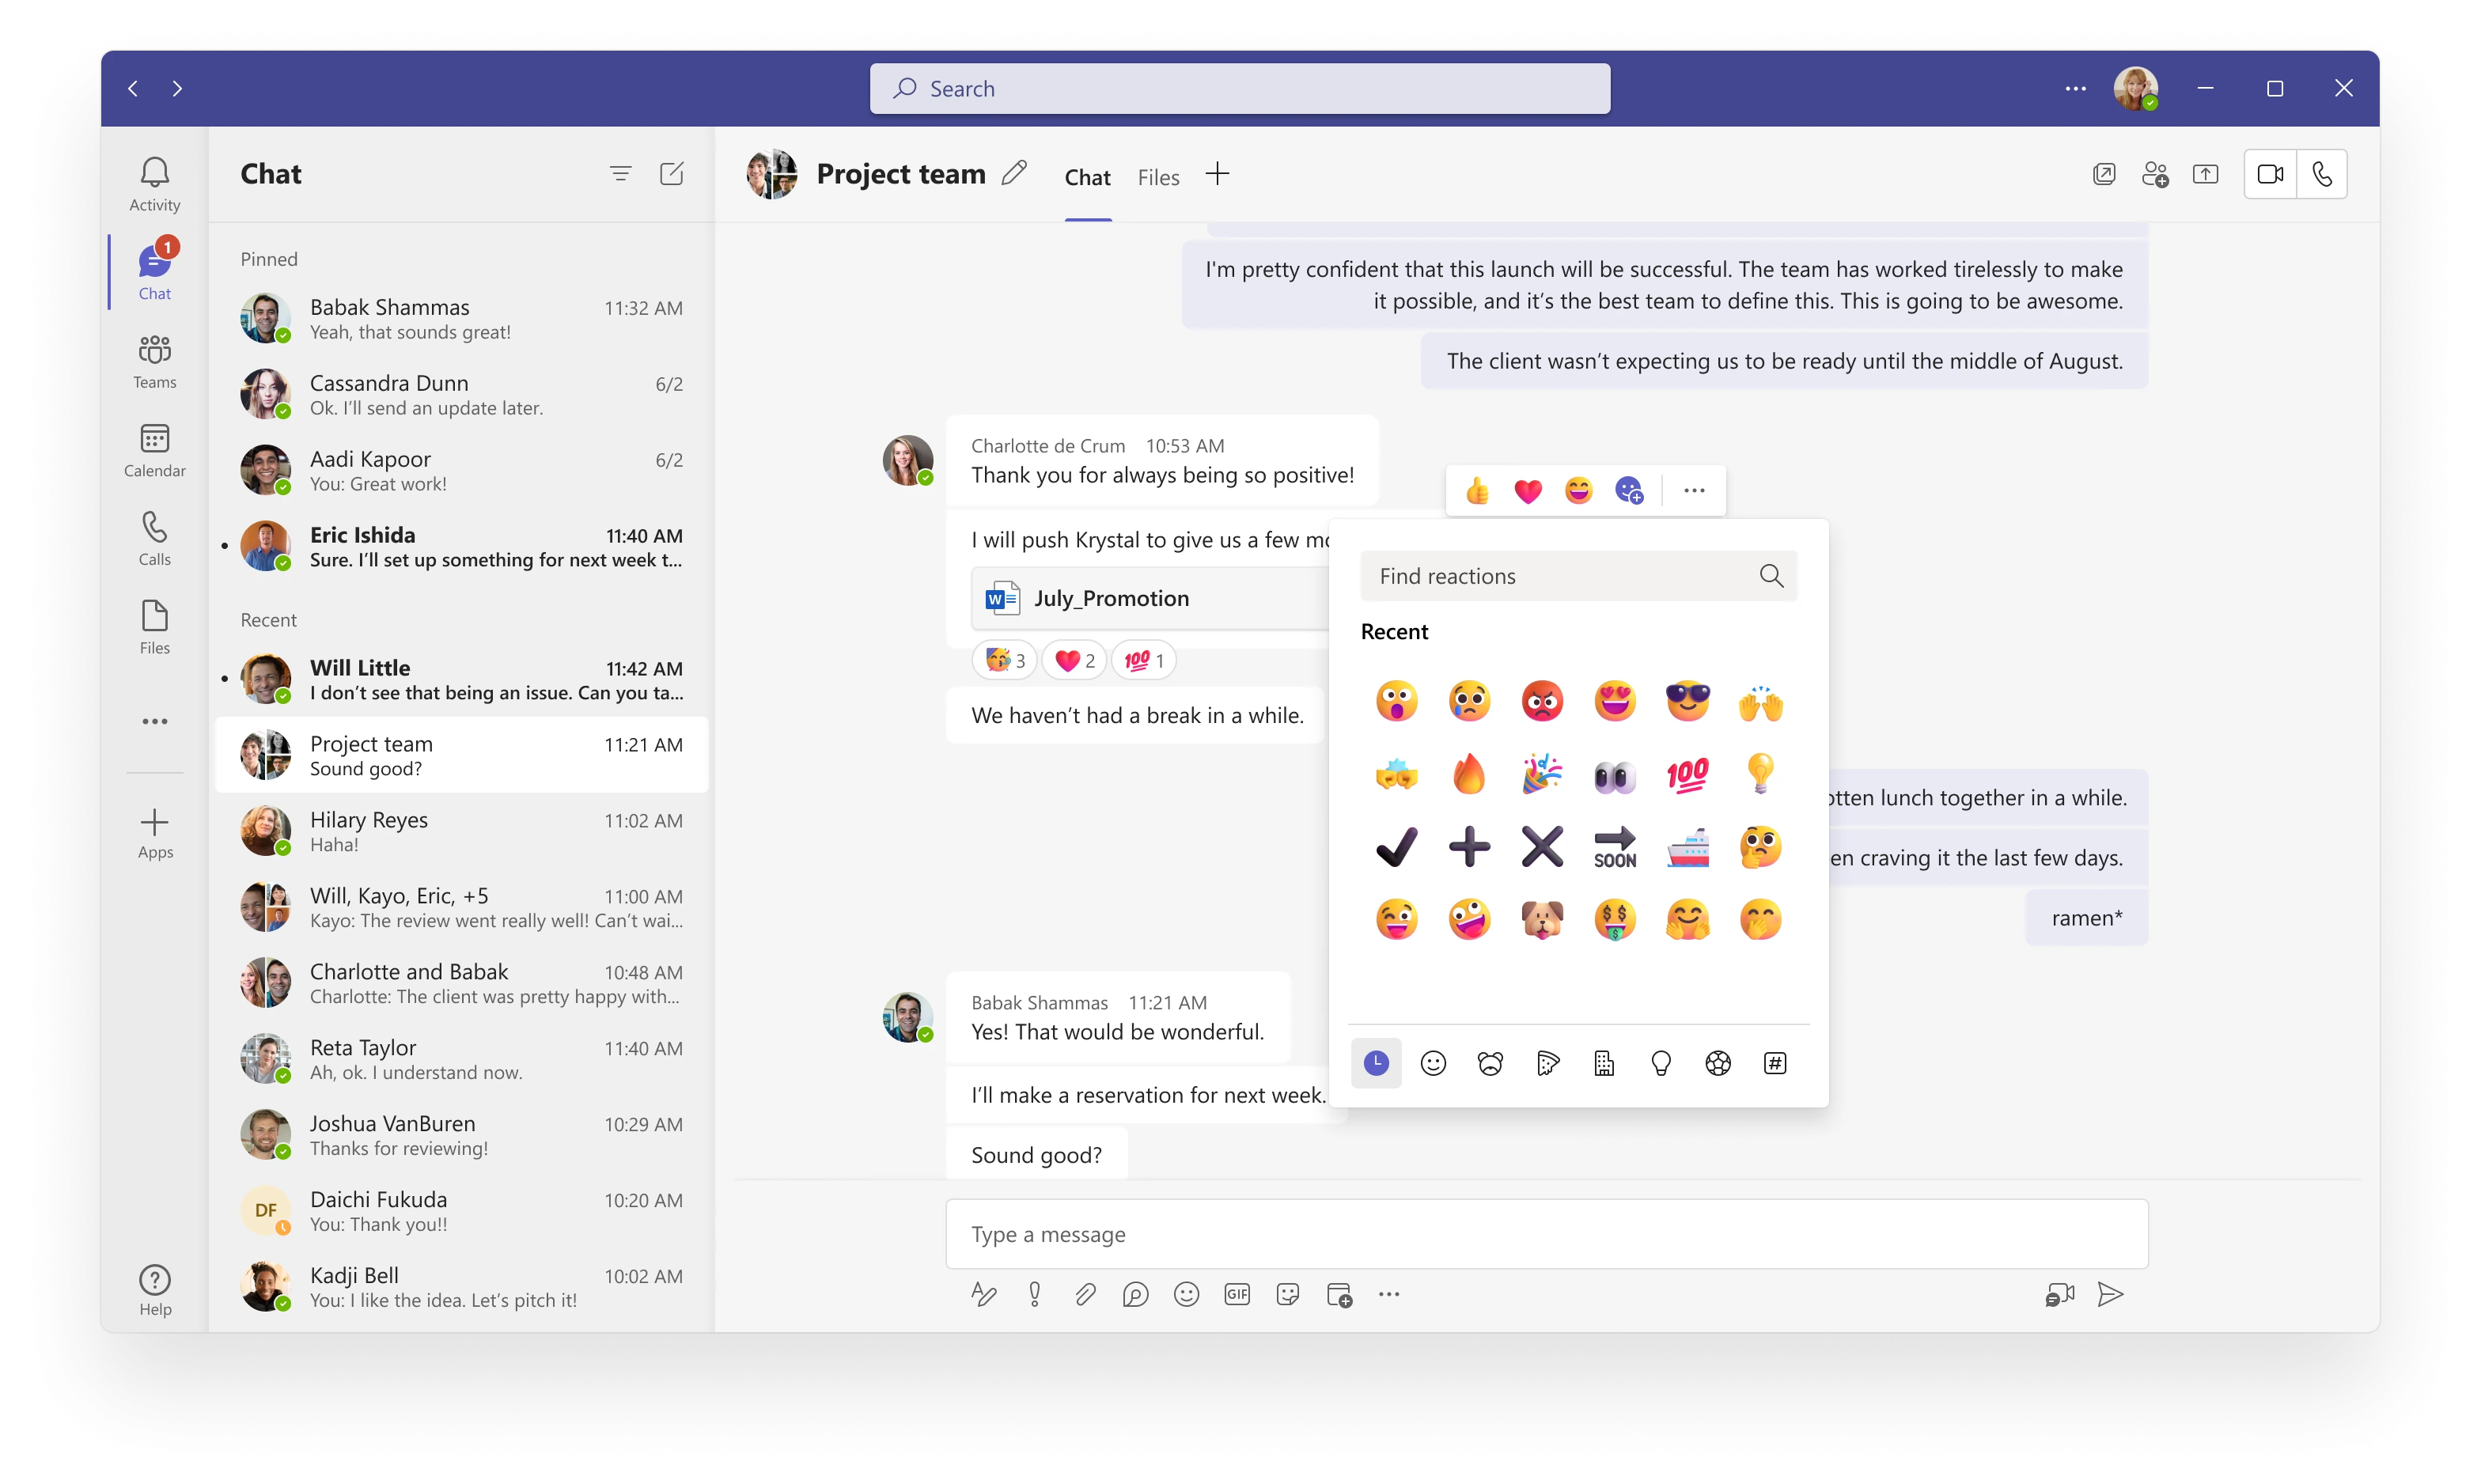 New Teams chat features includes 800 reaction emojis allowing everyone to express themselves in natural and authentic ways.